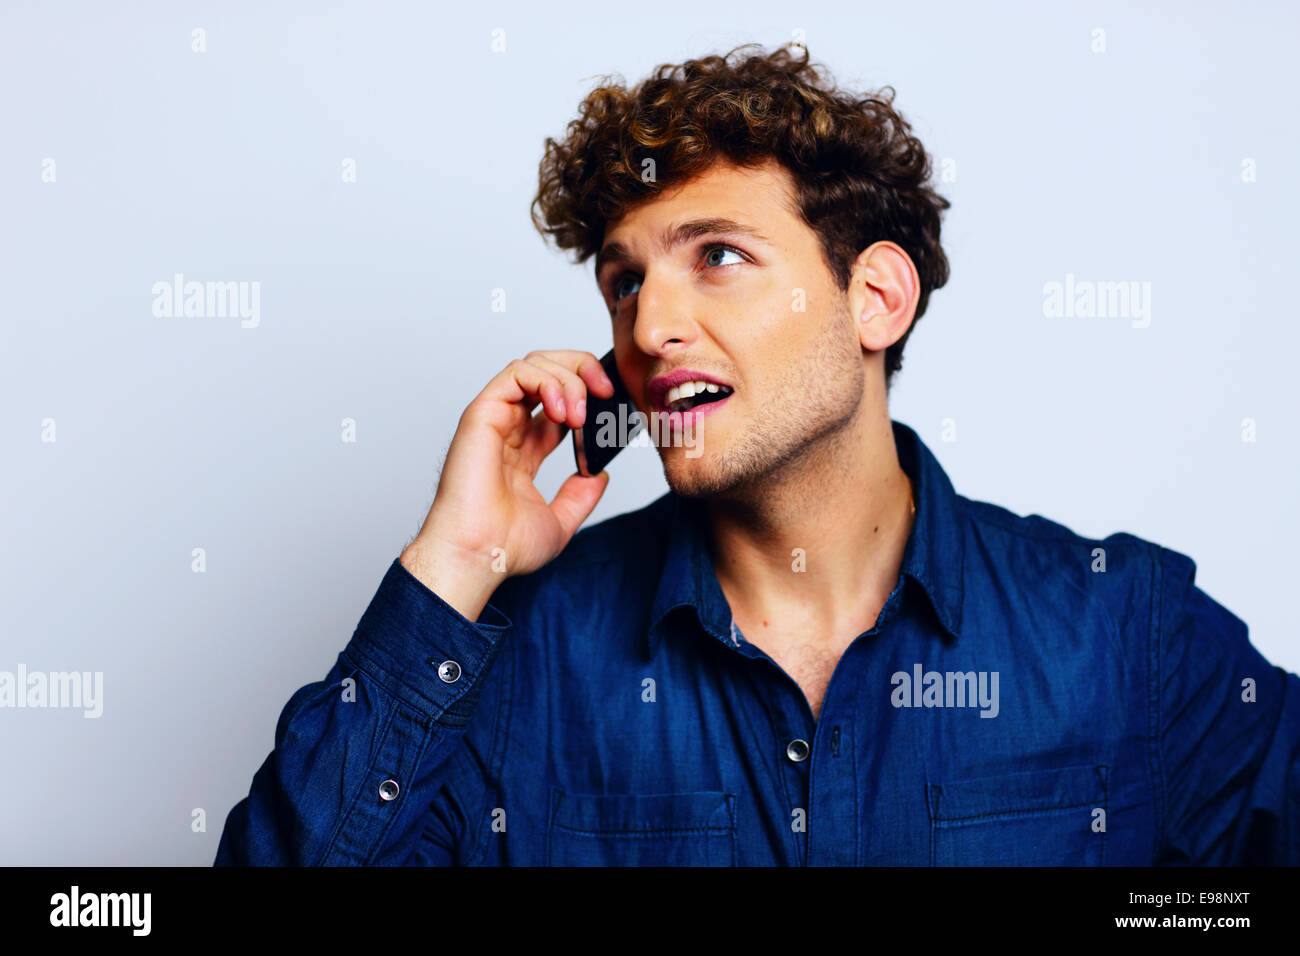 Man talking on a mobile phone and looking shocked Stock Photo